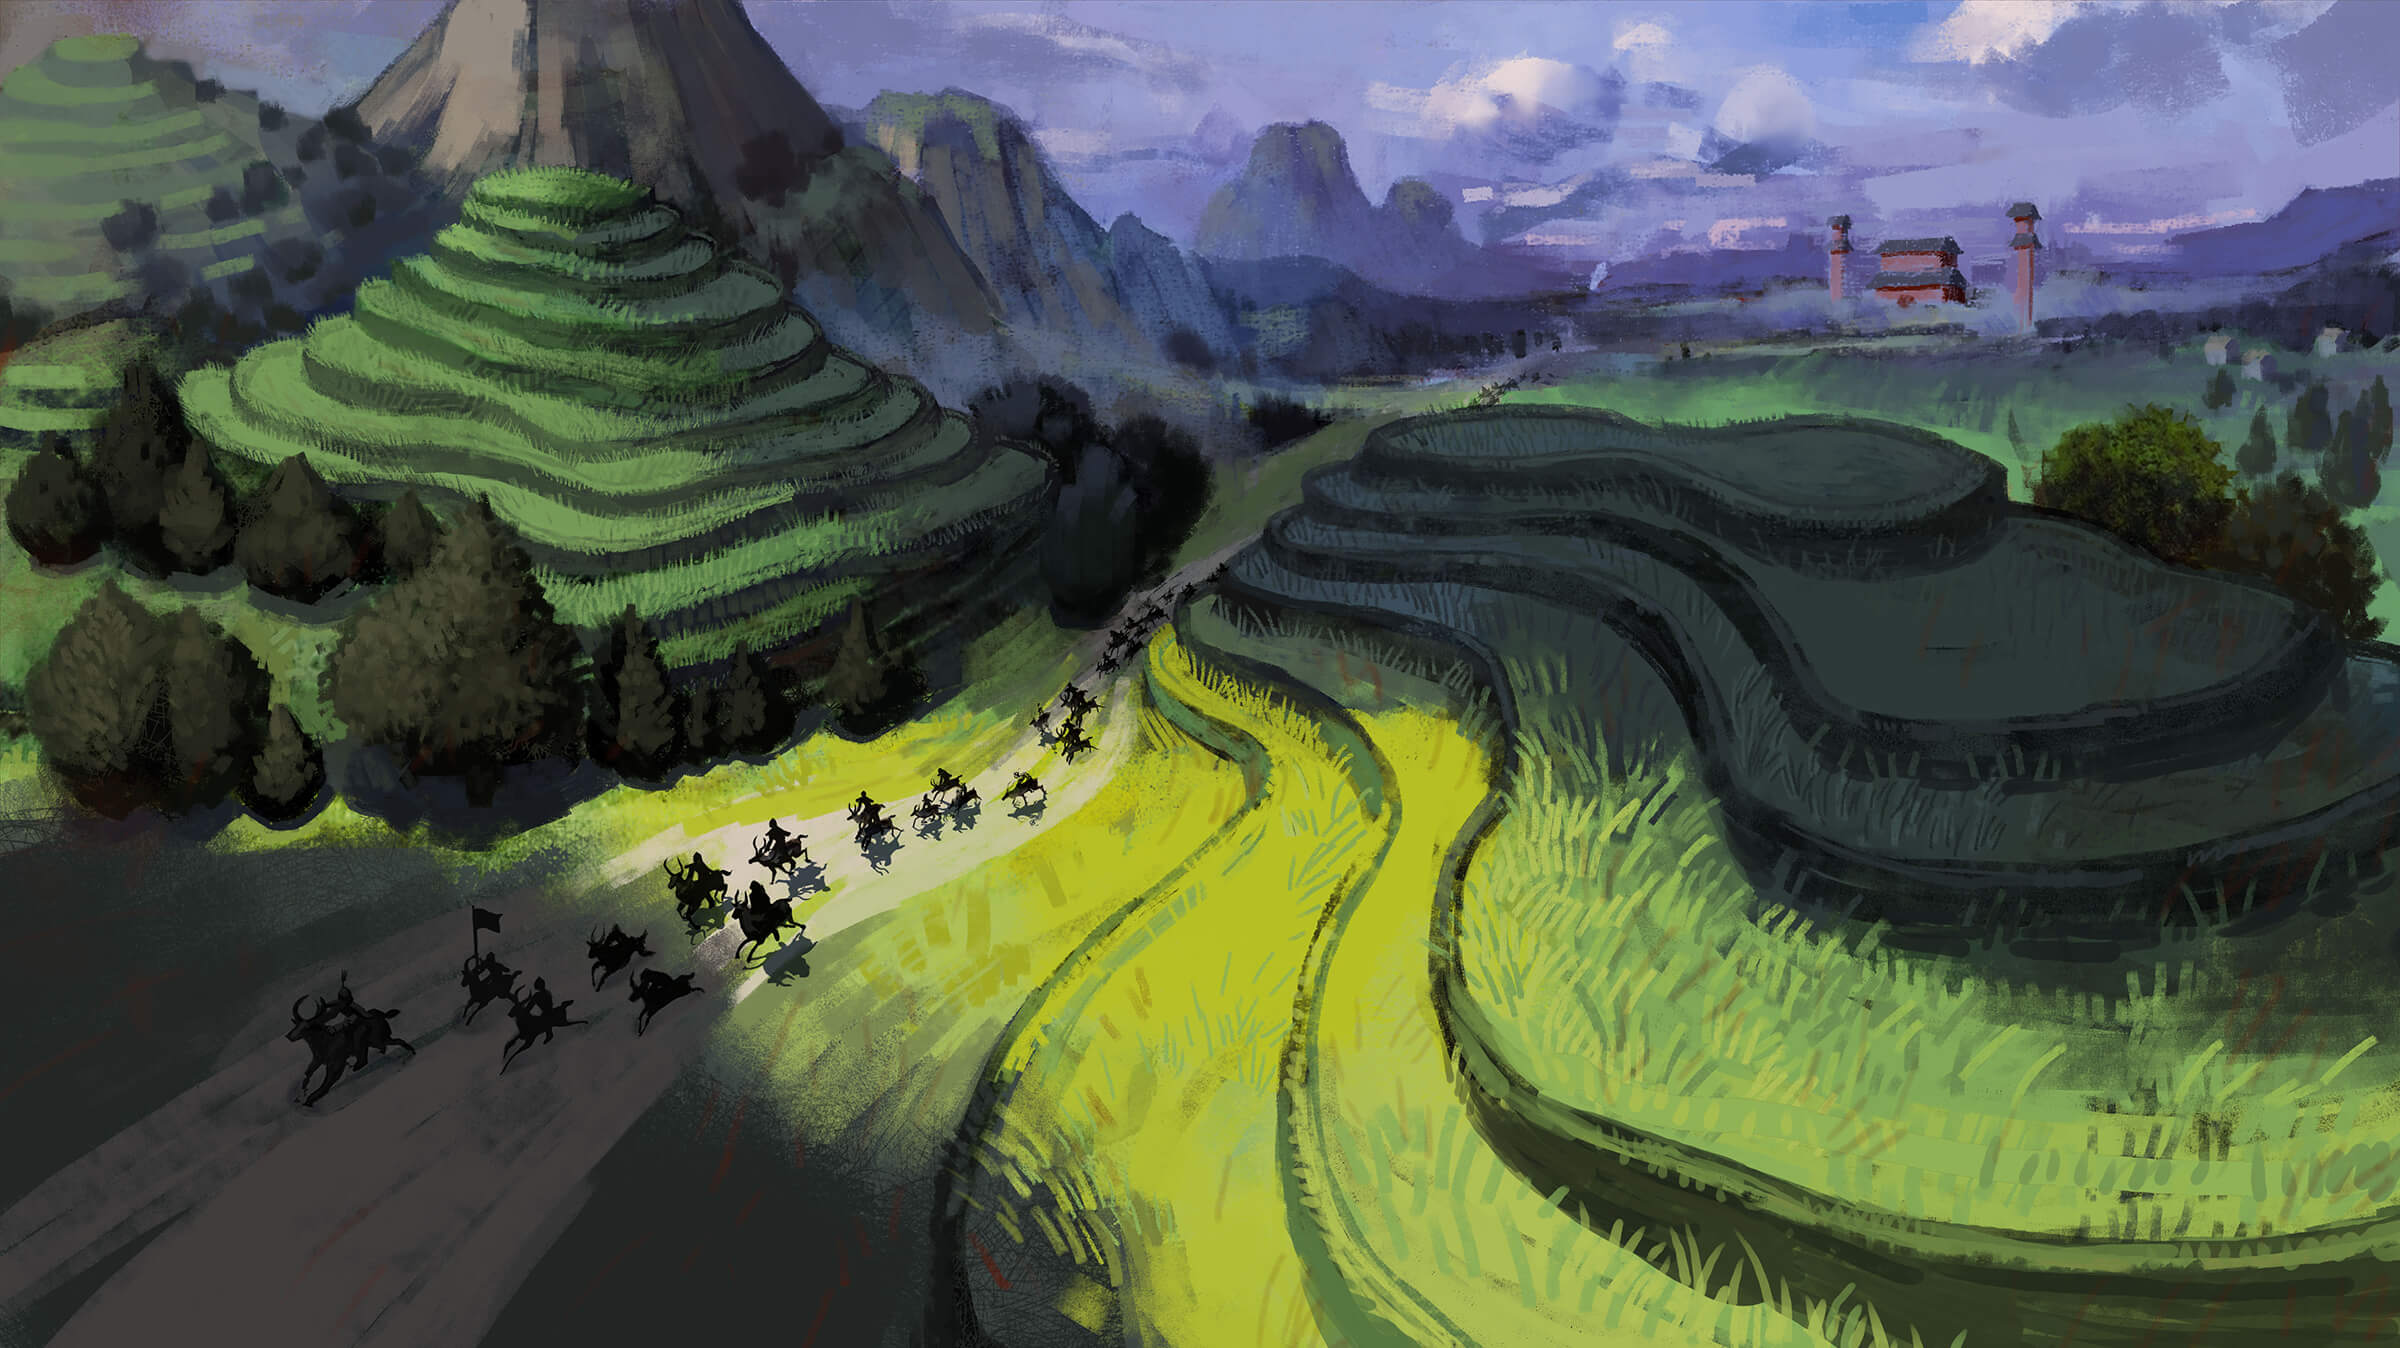 digital painting of people on horses against a backdrop of blue sky and terraced fields